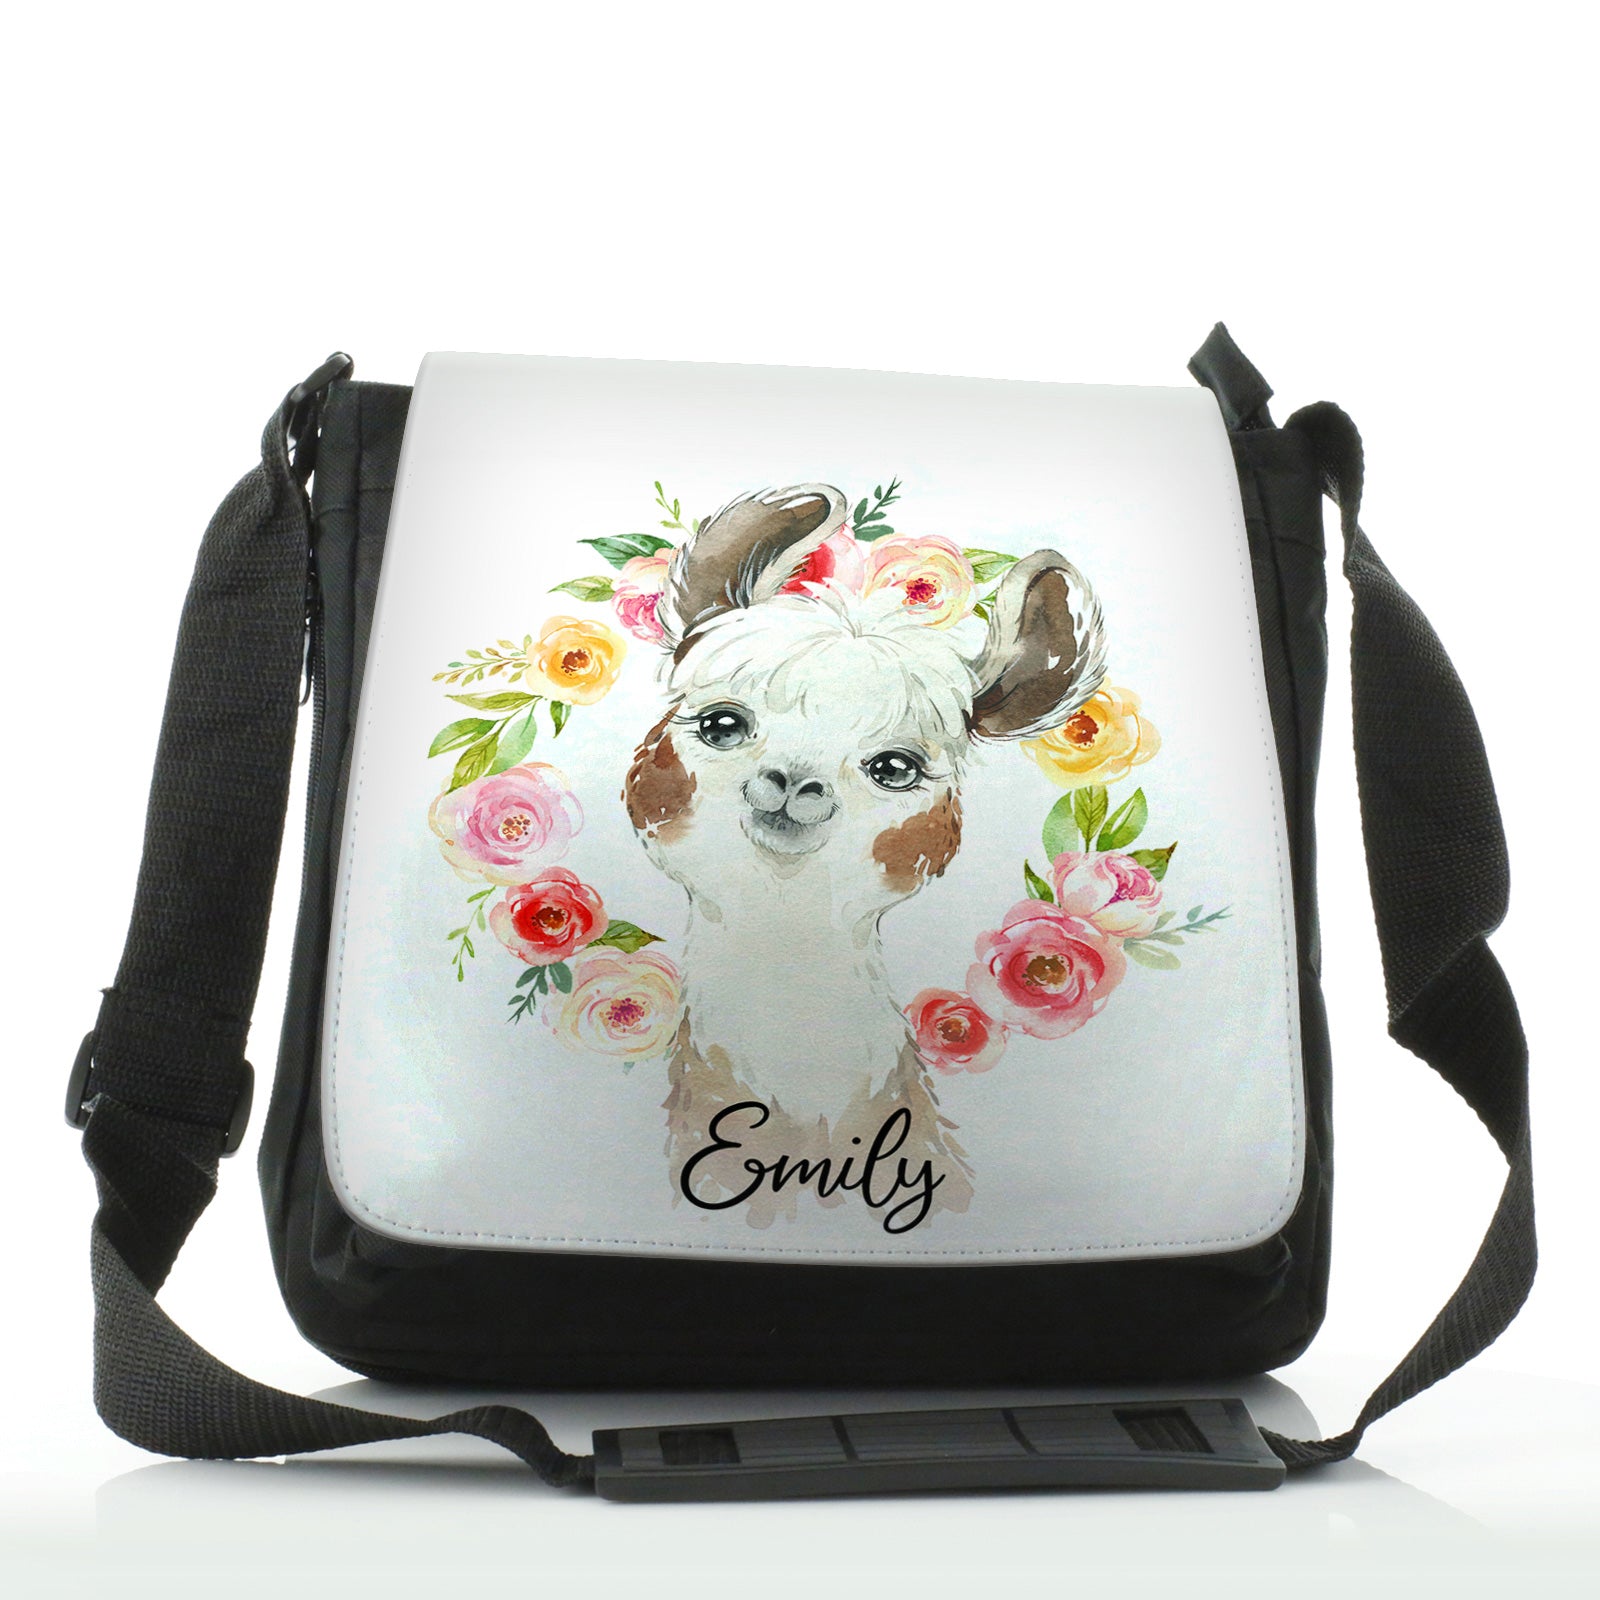 Personalised Shoulder Bag with Brown and White Alpaca Multicolour Flower Wreath and Cute Text